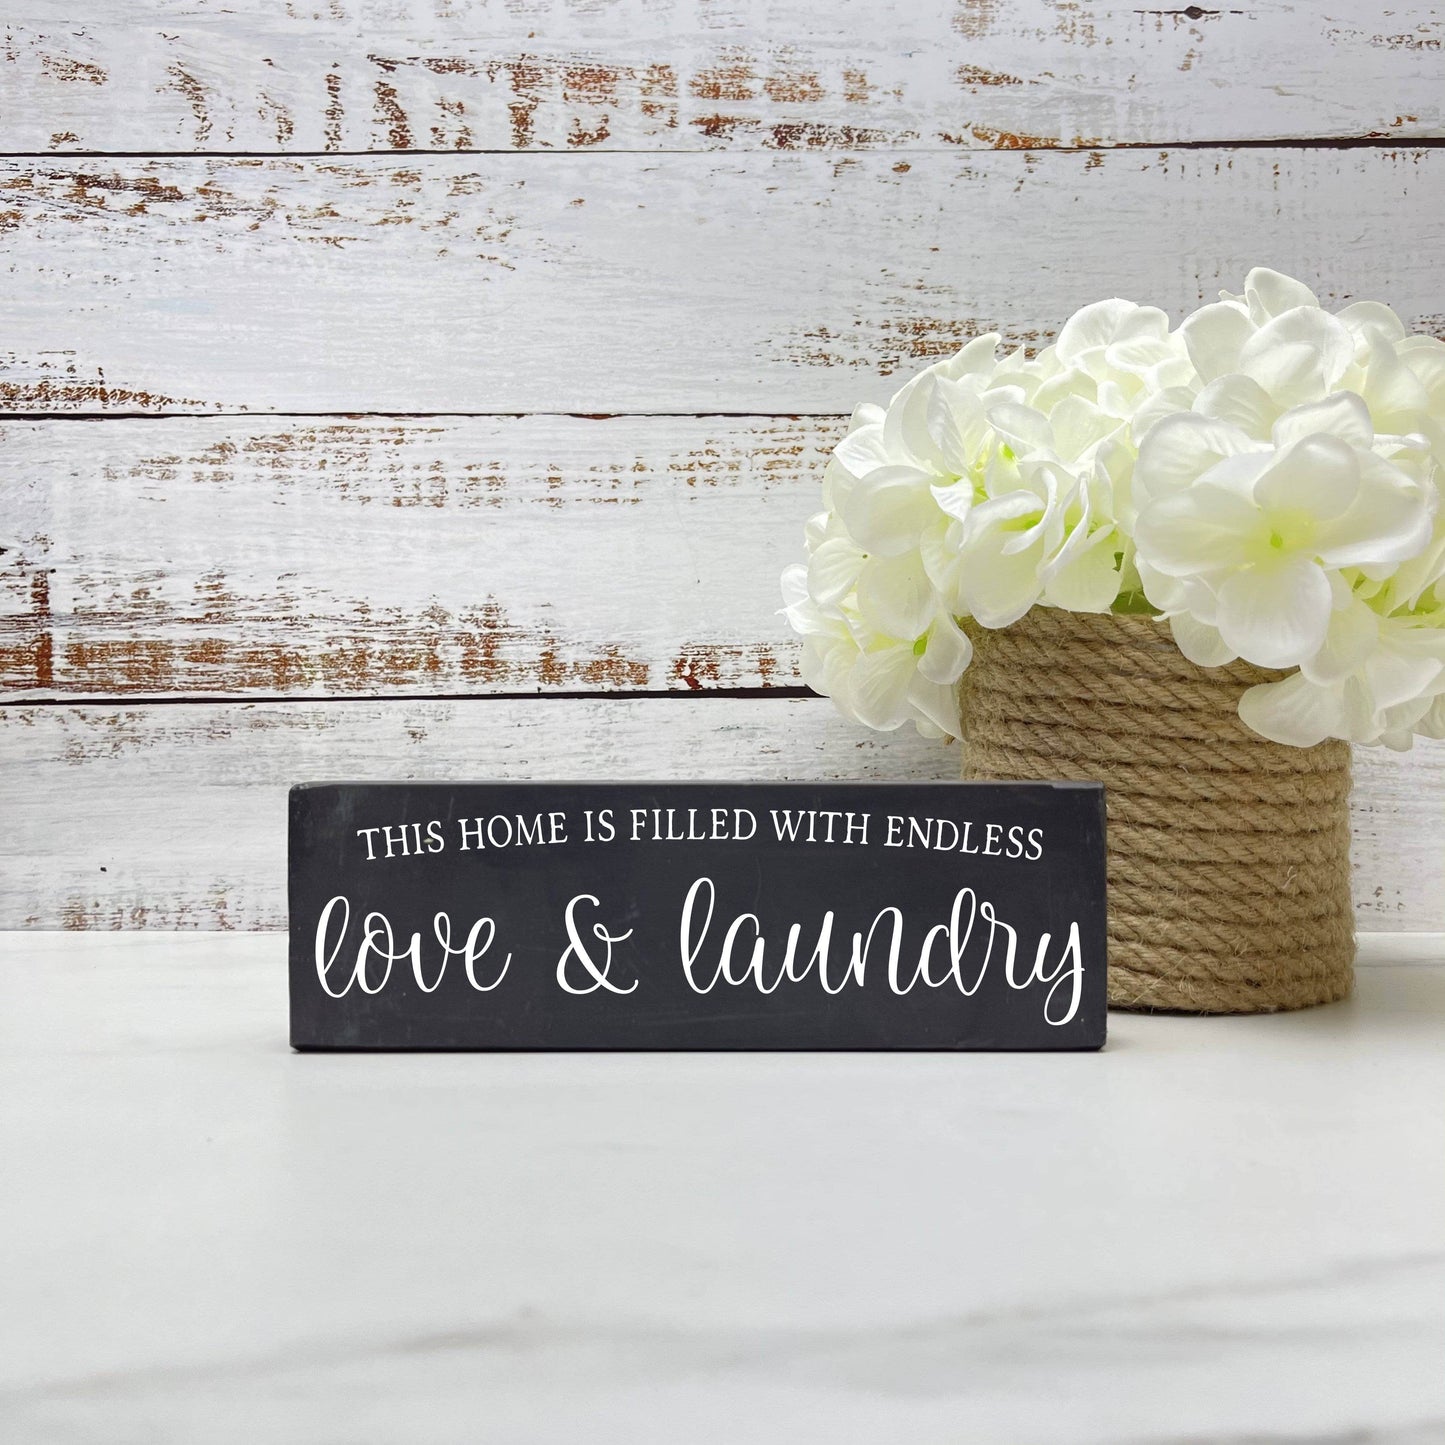 This Home is Filled with Endless Love and Laundry, laundry wood sign, laundry decor, home decor